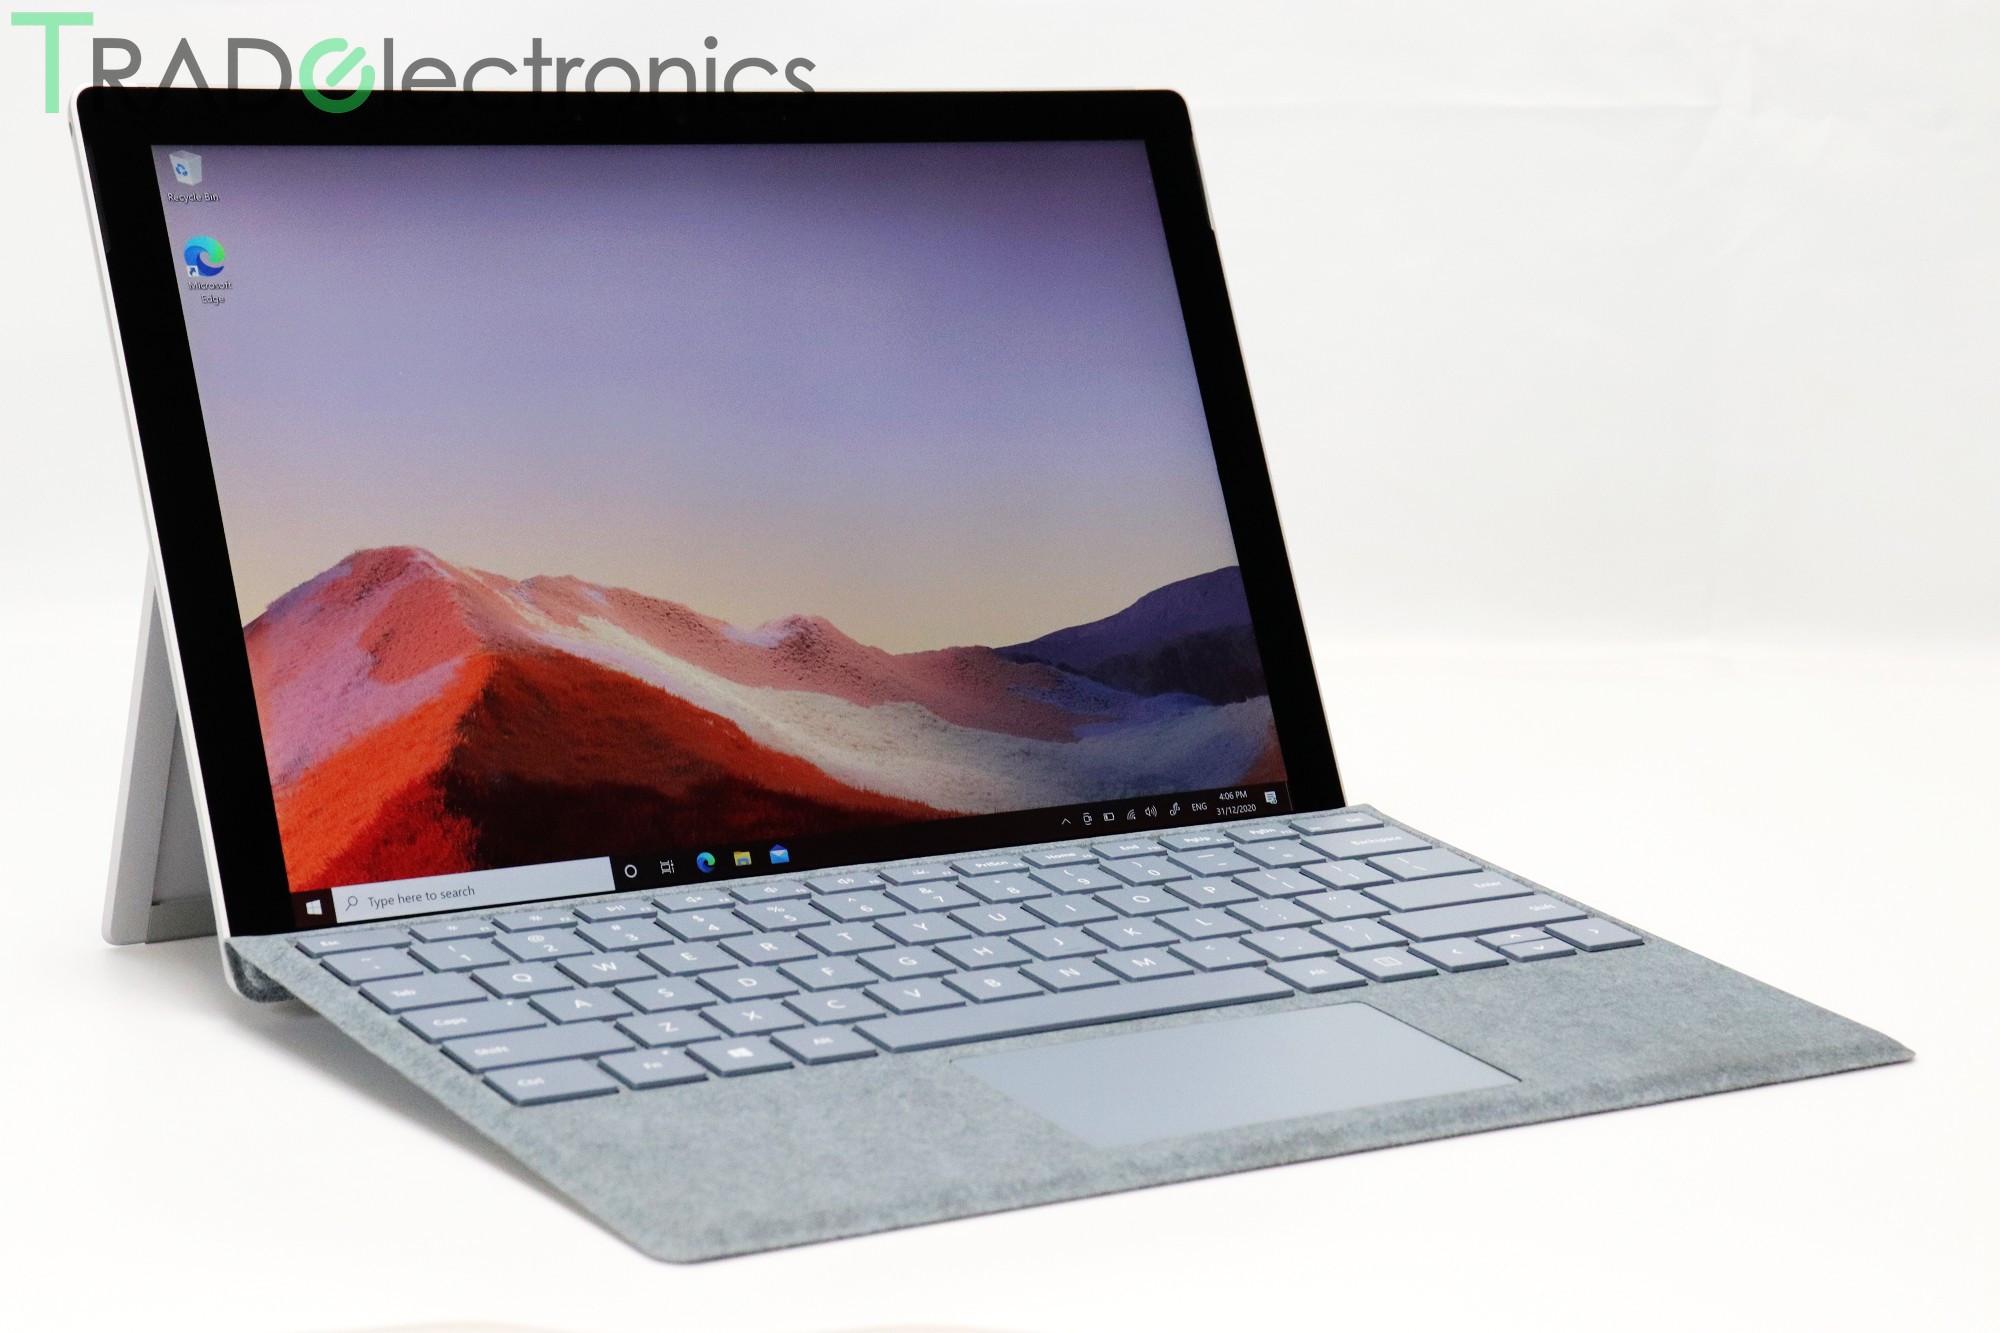 2020 Microsoft Surface Pro 7|Used laptop for Sale | Tradelectronics